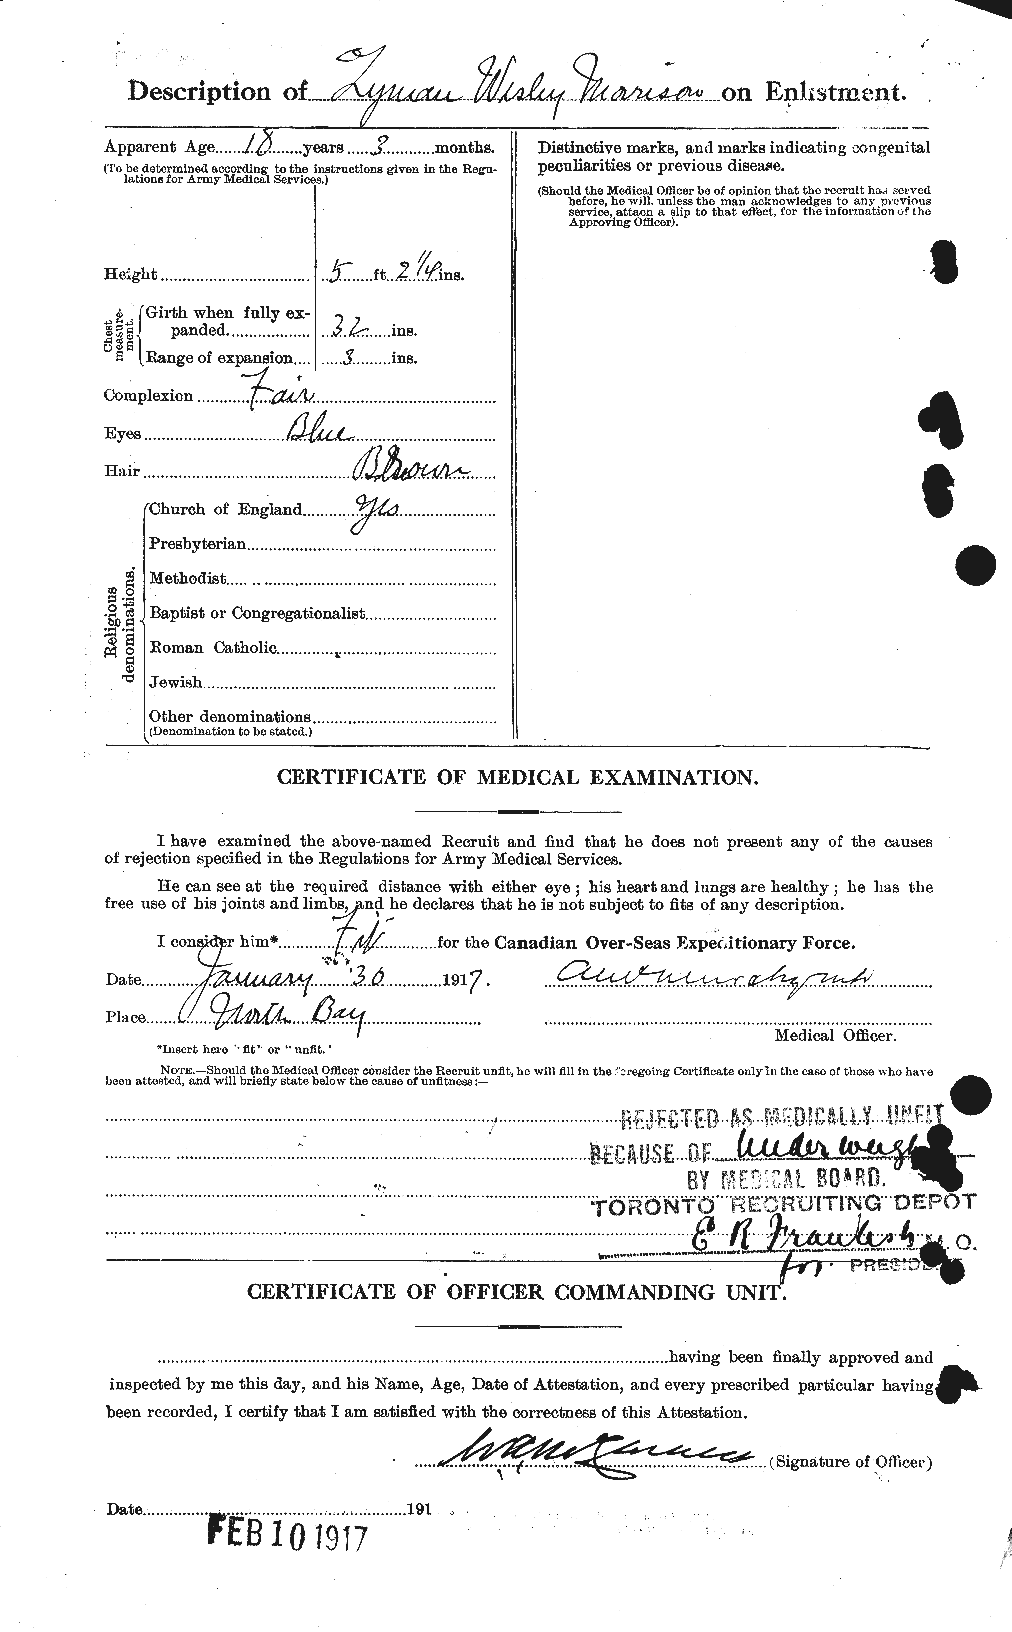 Personnel Records of the First World War - CEF 507148b